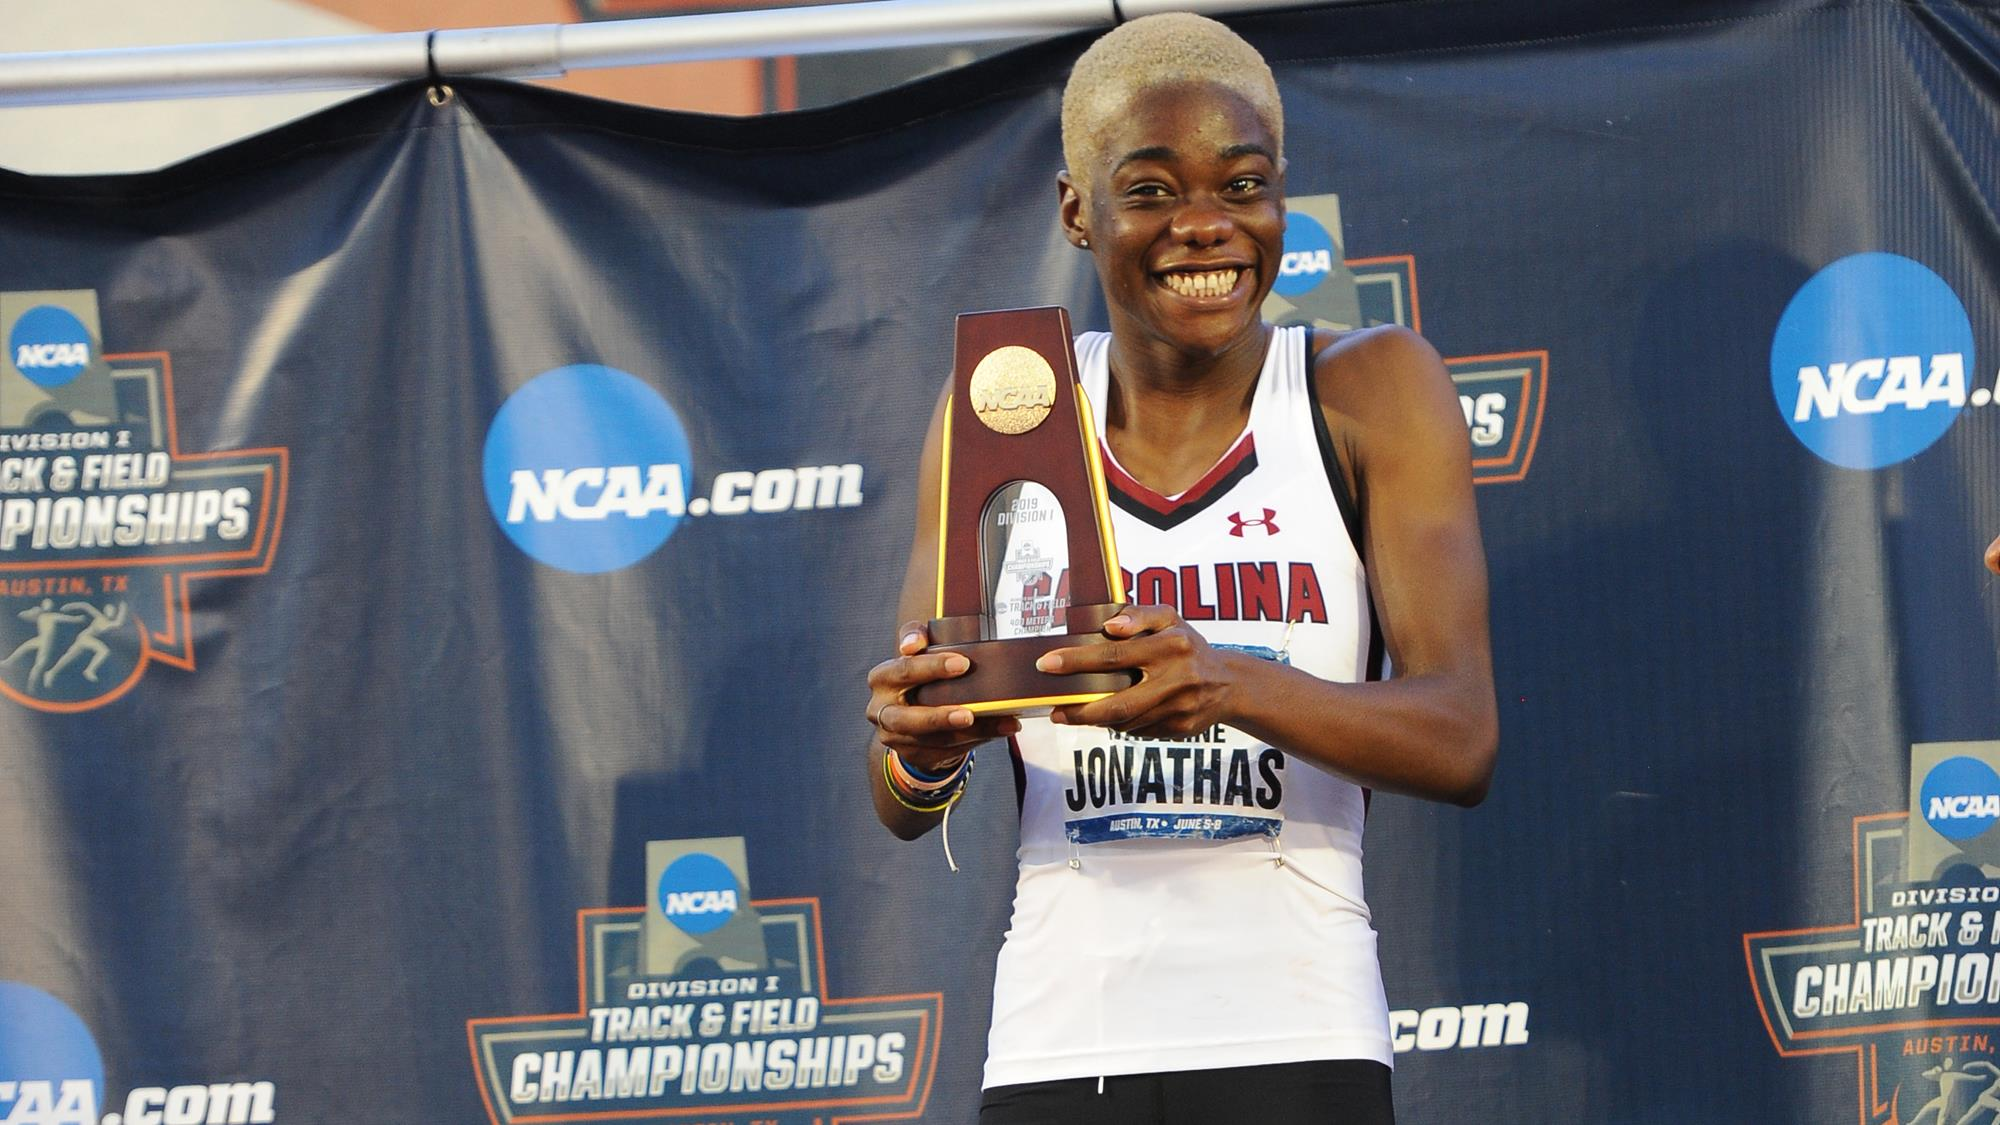 Jonathas Claims 400m Crown to Close NCAA Outdoor Championships